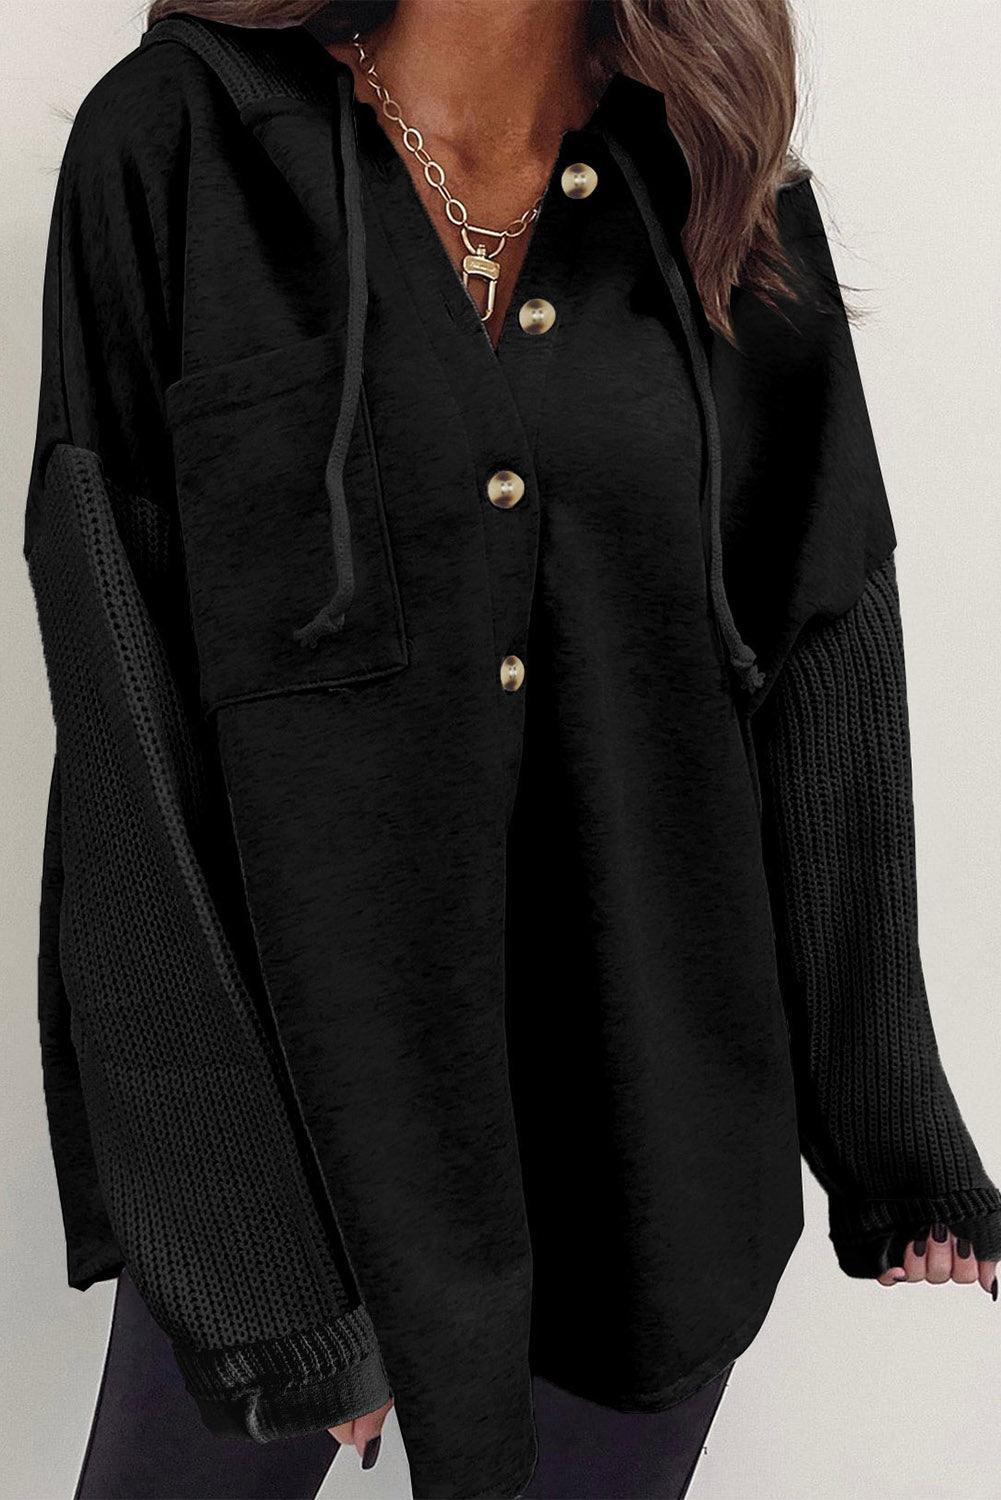 Black Button Up Contrast Knitted Sleeves Hooded Jacket - L & M Kee, LLC